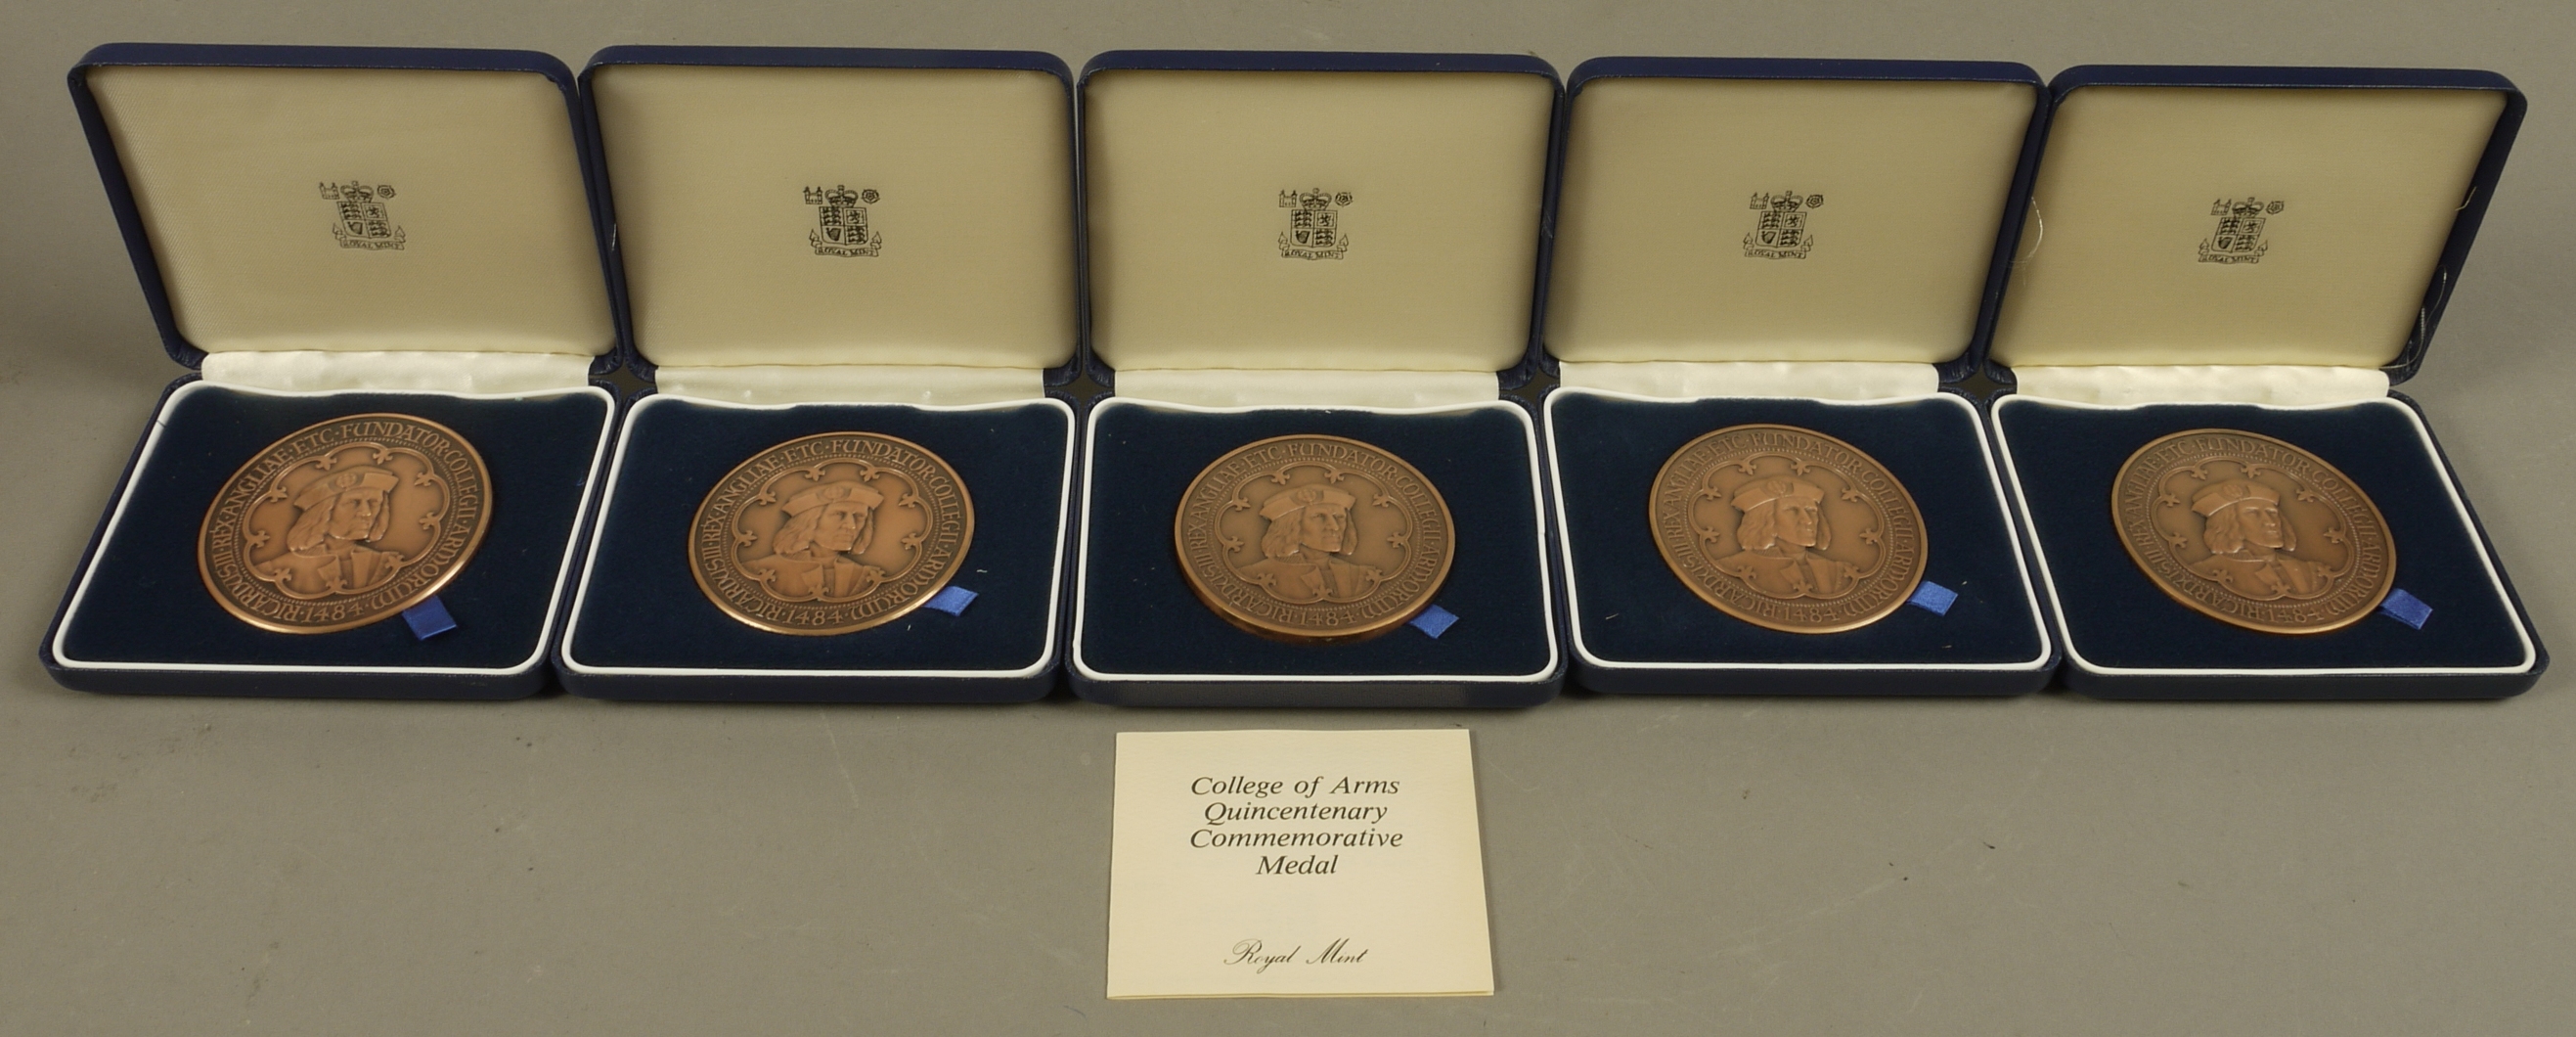 Five college of arms quincentenary medals struck in bronze by the royal mint depicting Richard III